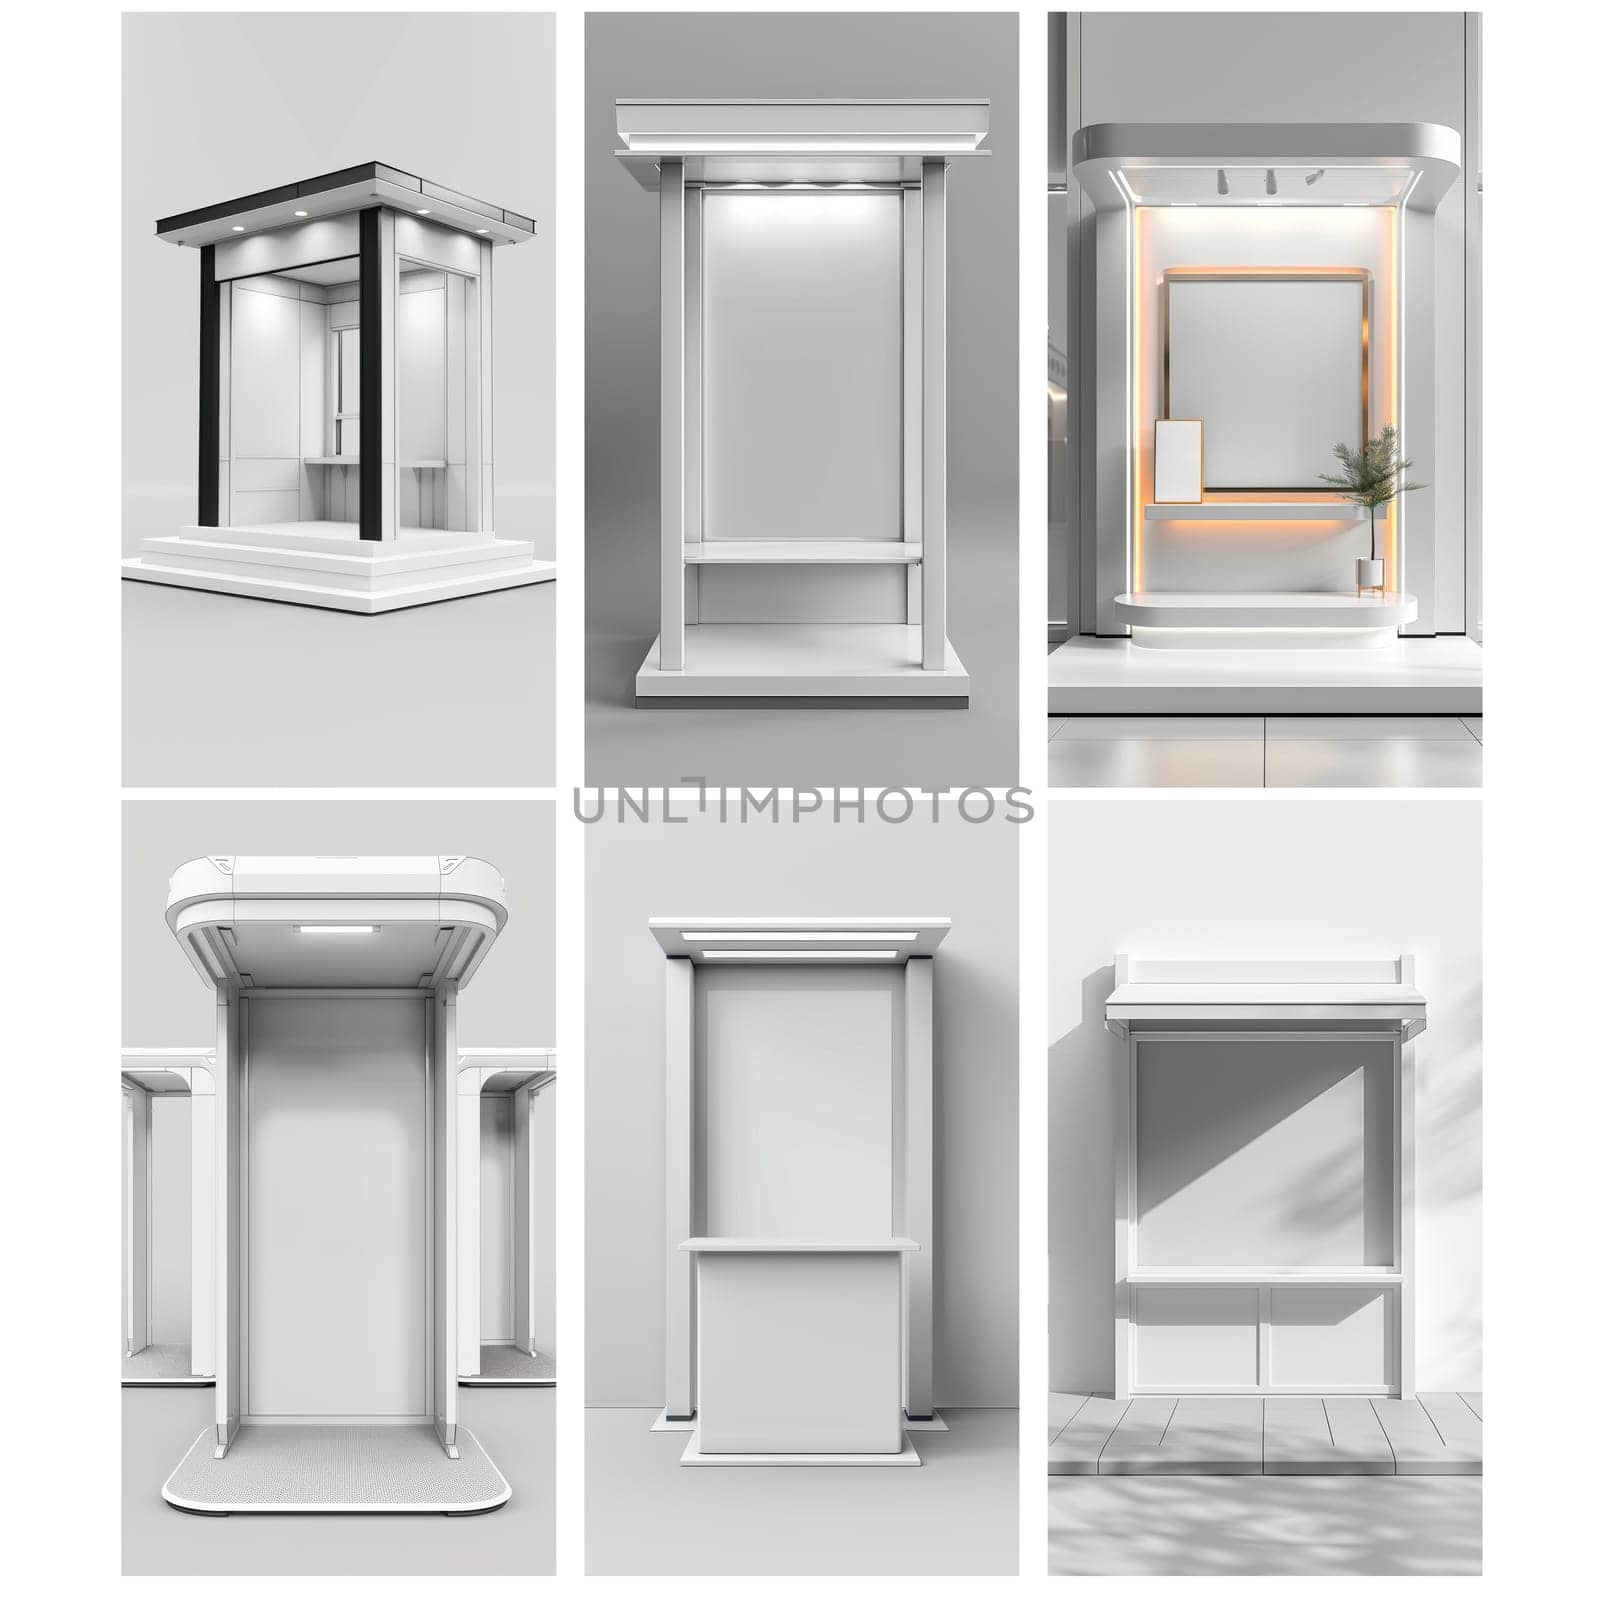 Booth for advertising. A series of white and grey images of different types of bus shelters by itchaznong